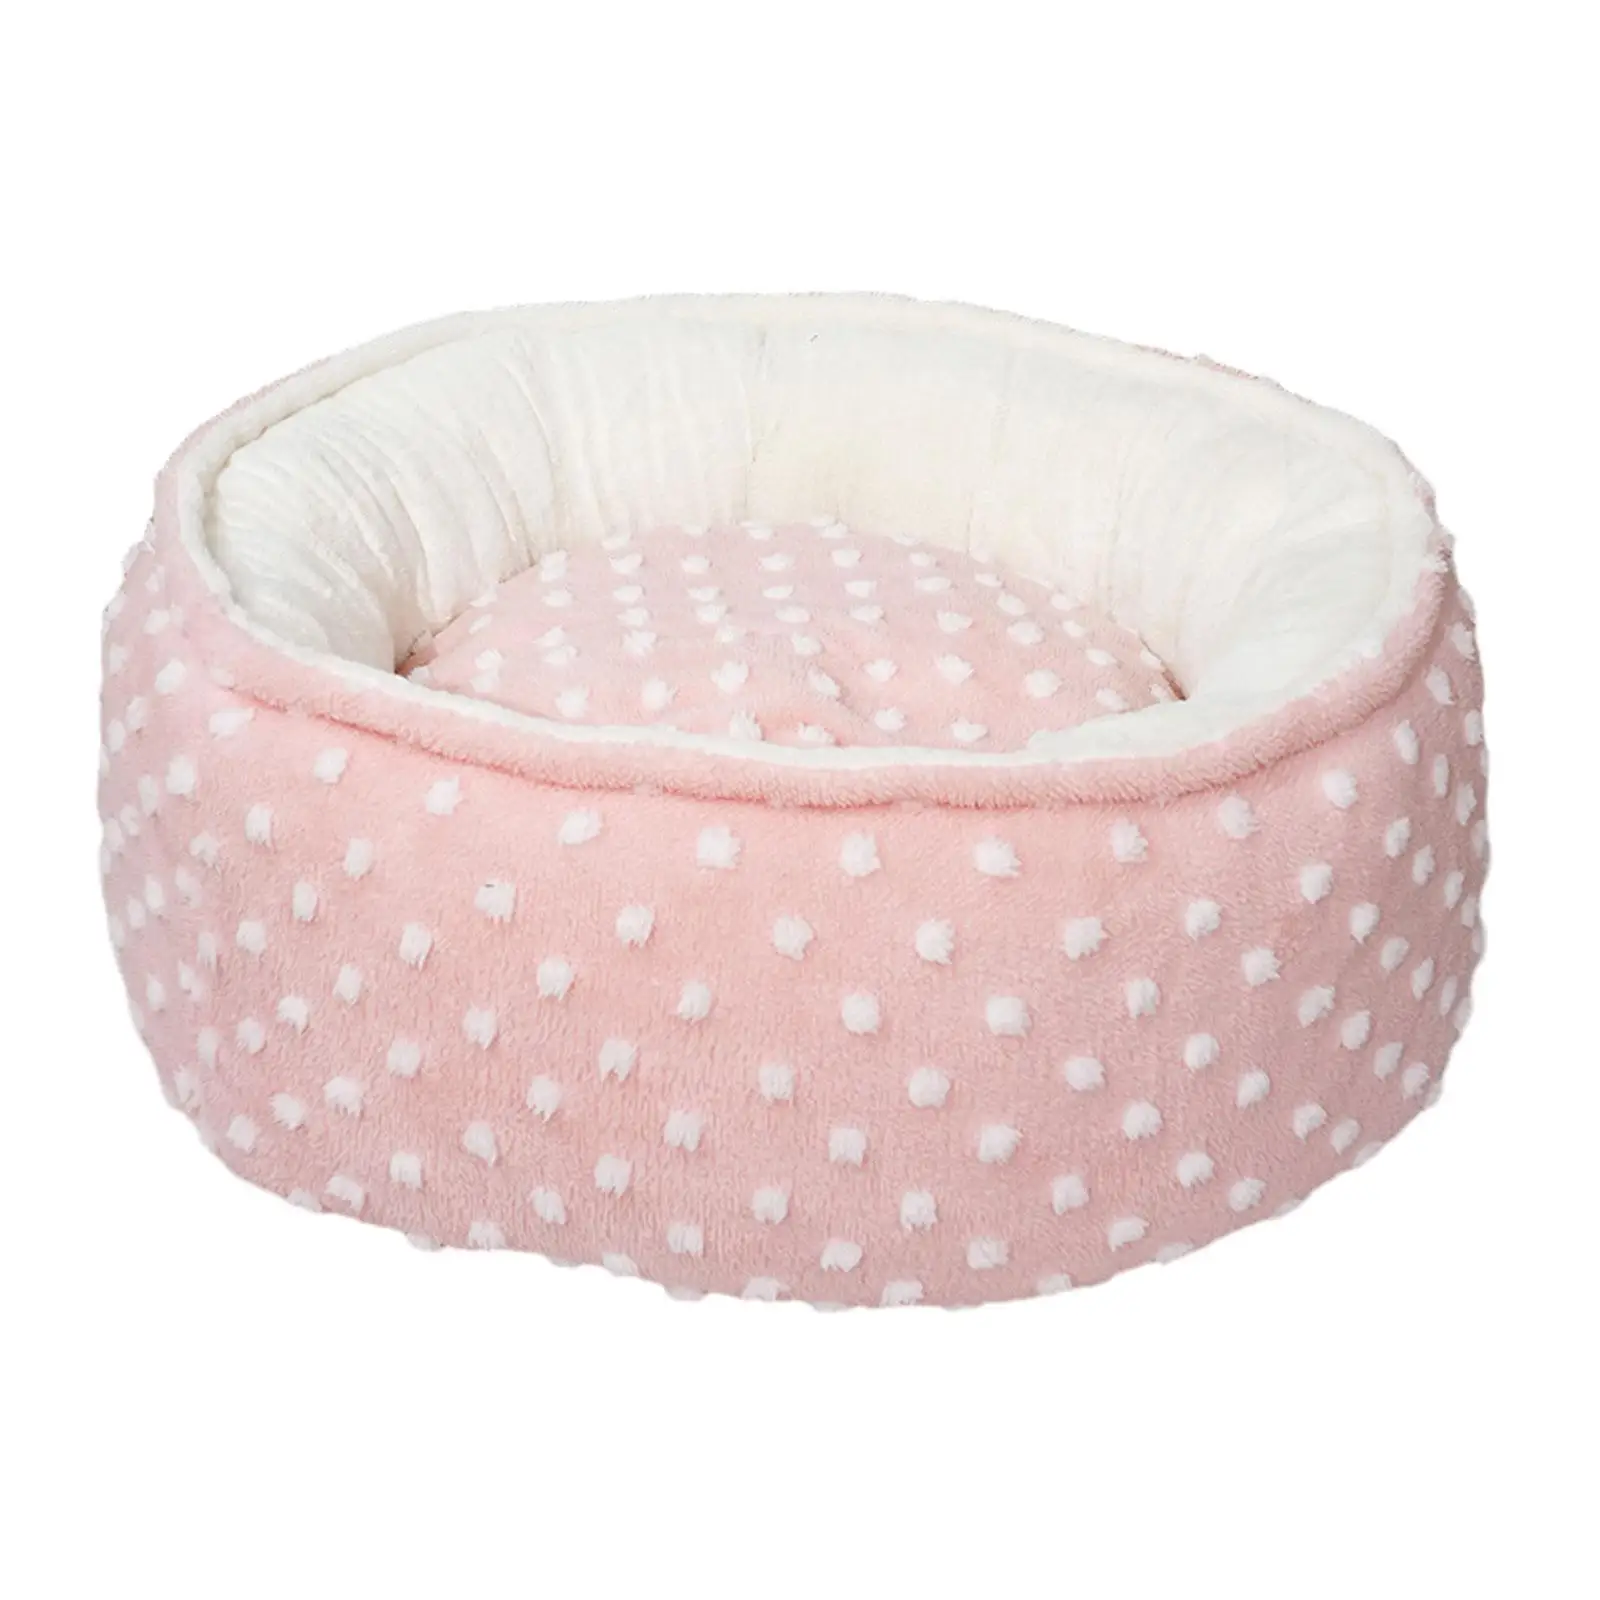 Dog Cat Bed Comfortable Self Warming Calming Autumn Winter Soft Plush Round Pet Bed Kennel Cat Nest for Dog Puppy Kitten Cats